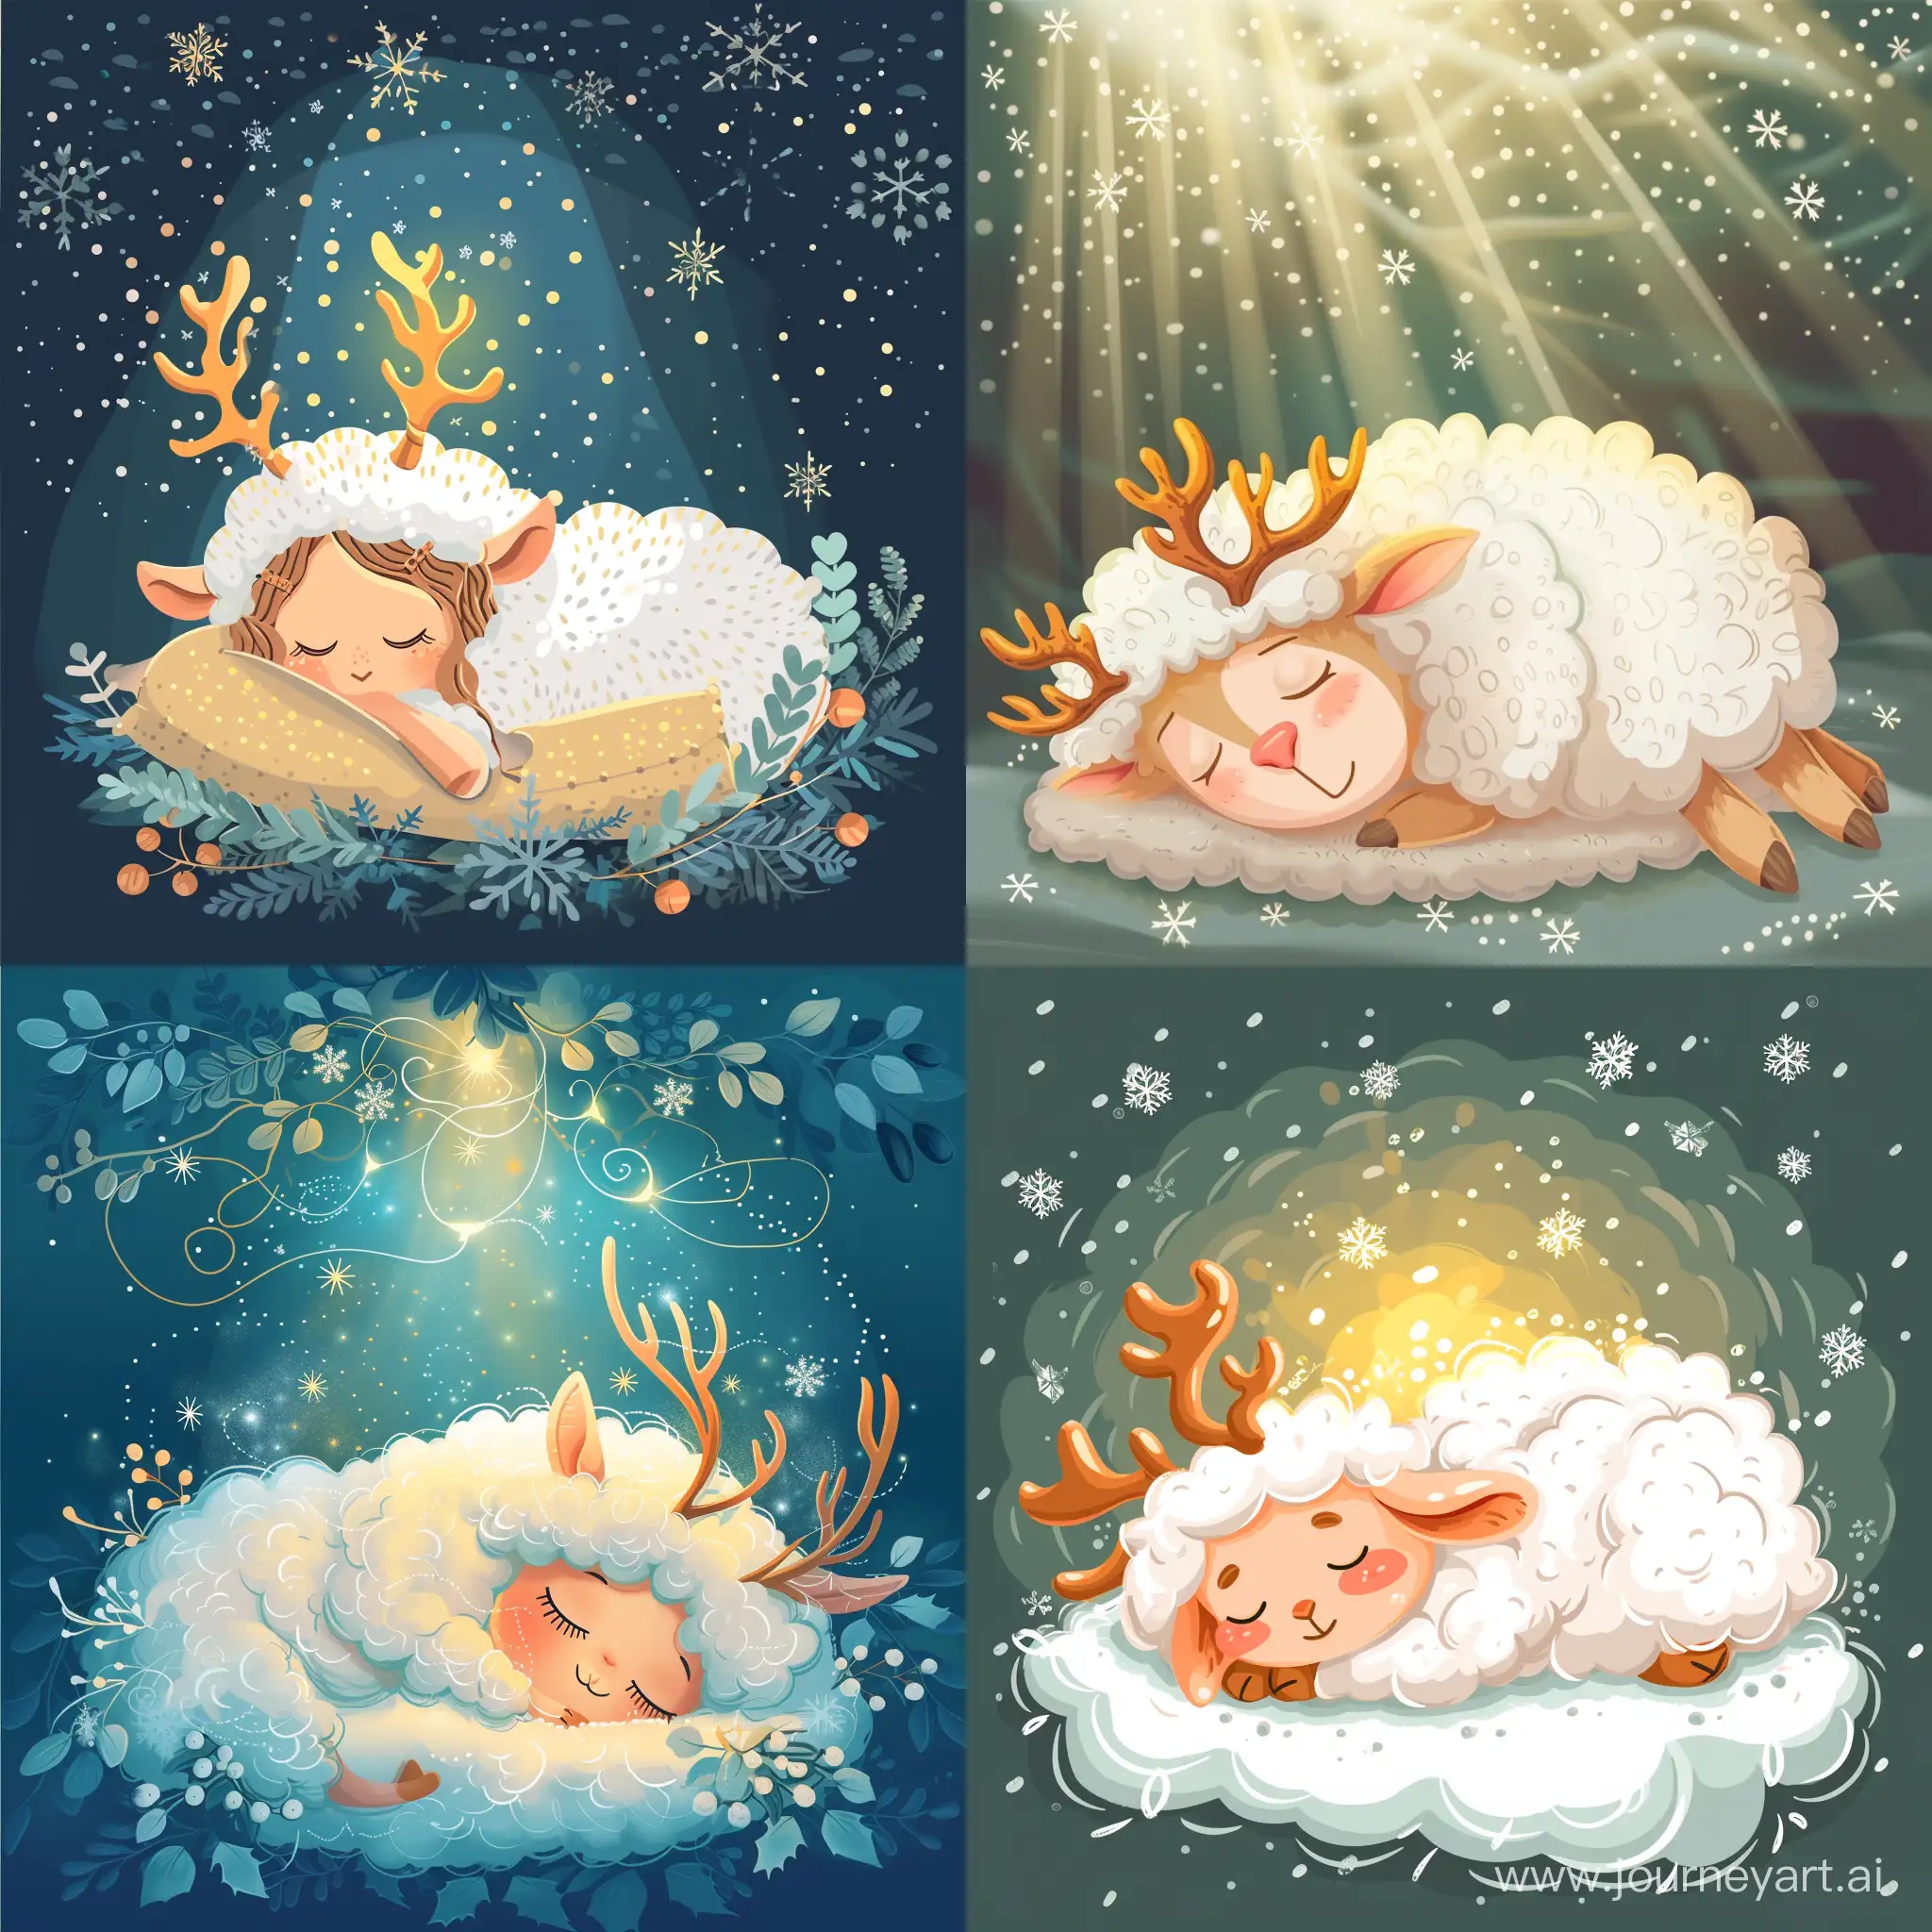 Cozy-Cartoon-Illustration-of-Sleeping-Sheep-Princess-with-Little-Antlers-and-Mysterious-Light